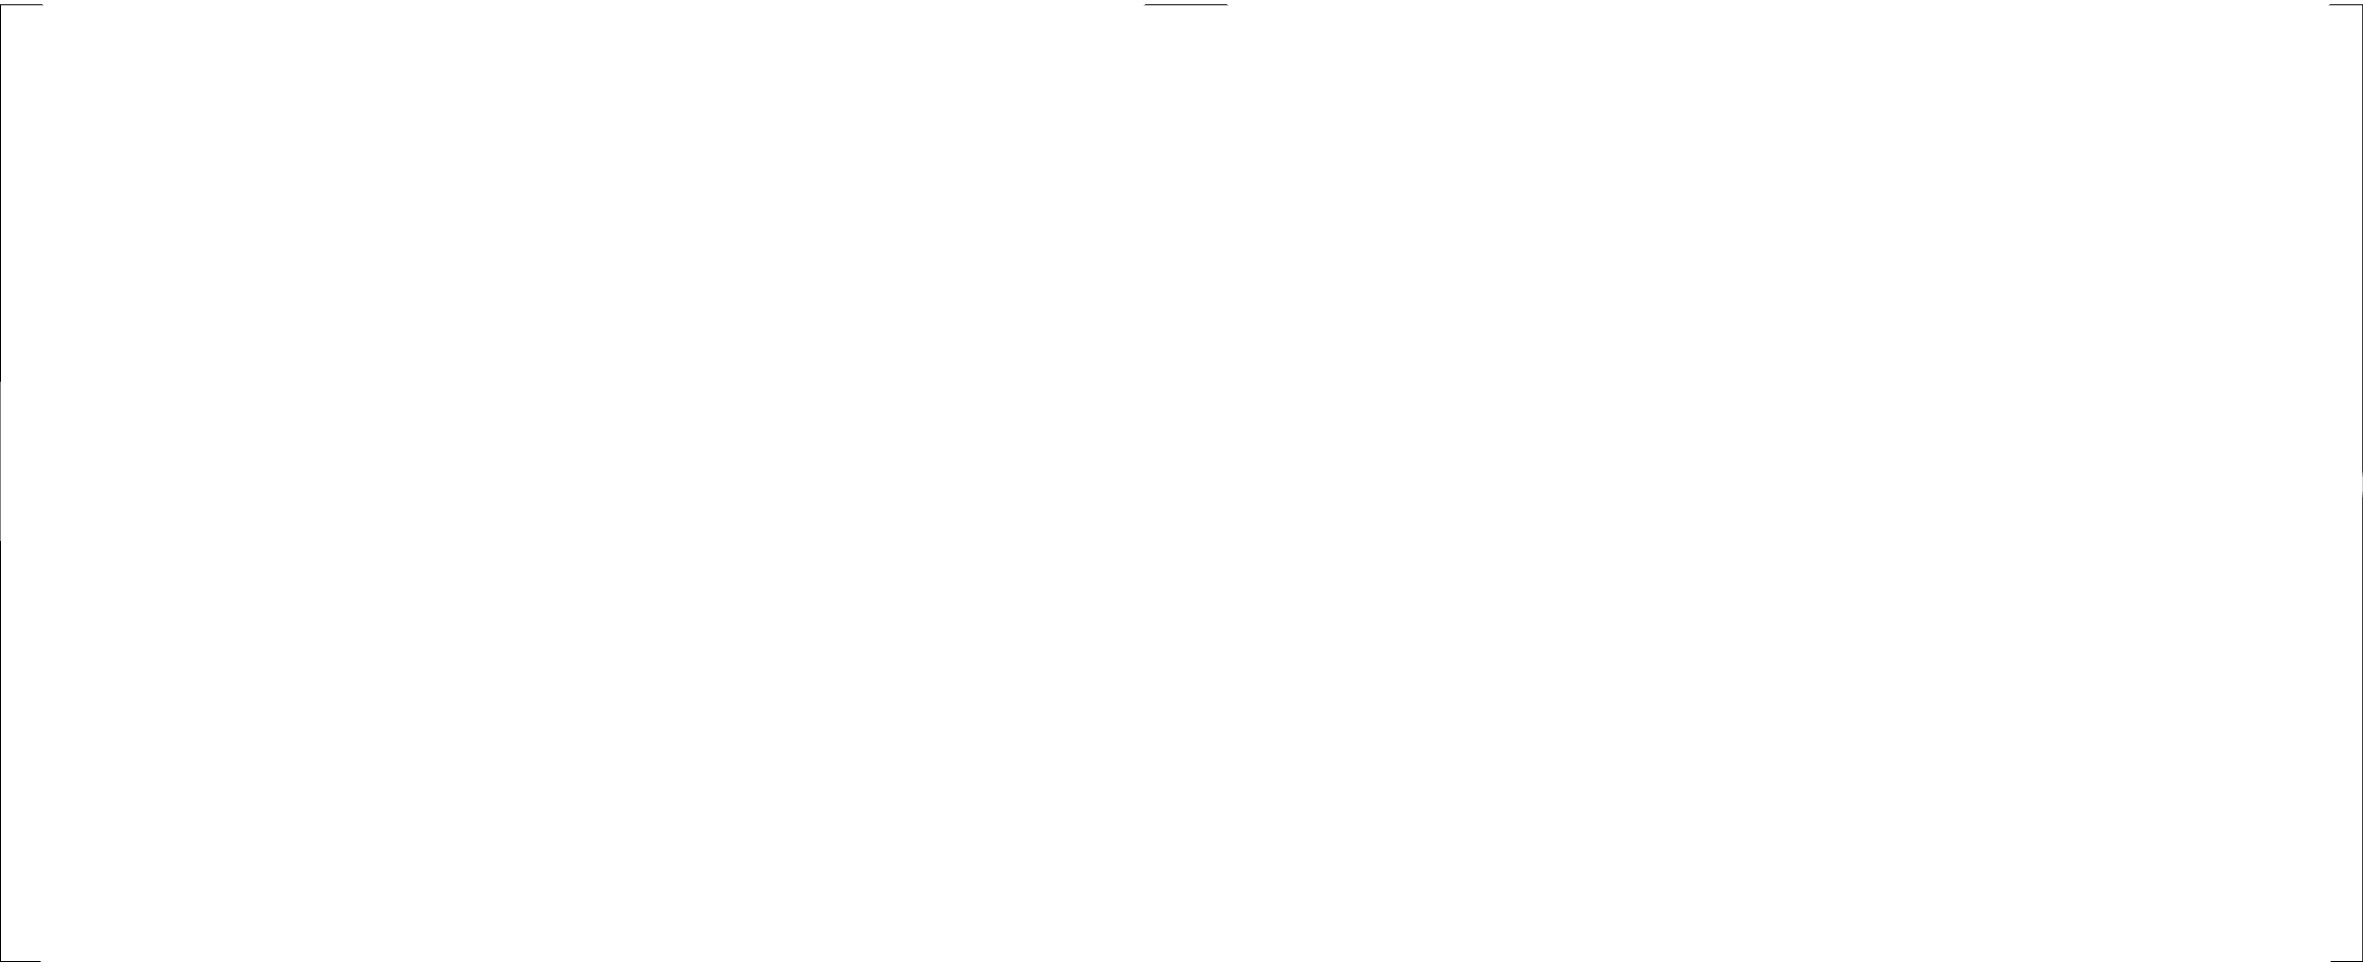 Lewis Logo - Lewis Coaches - 95 Years of Passenger Service